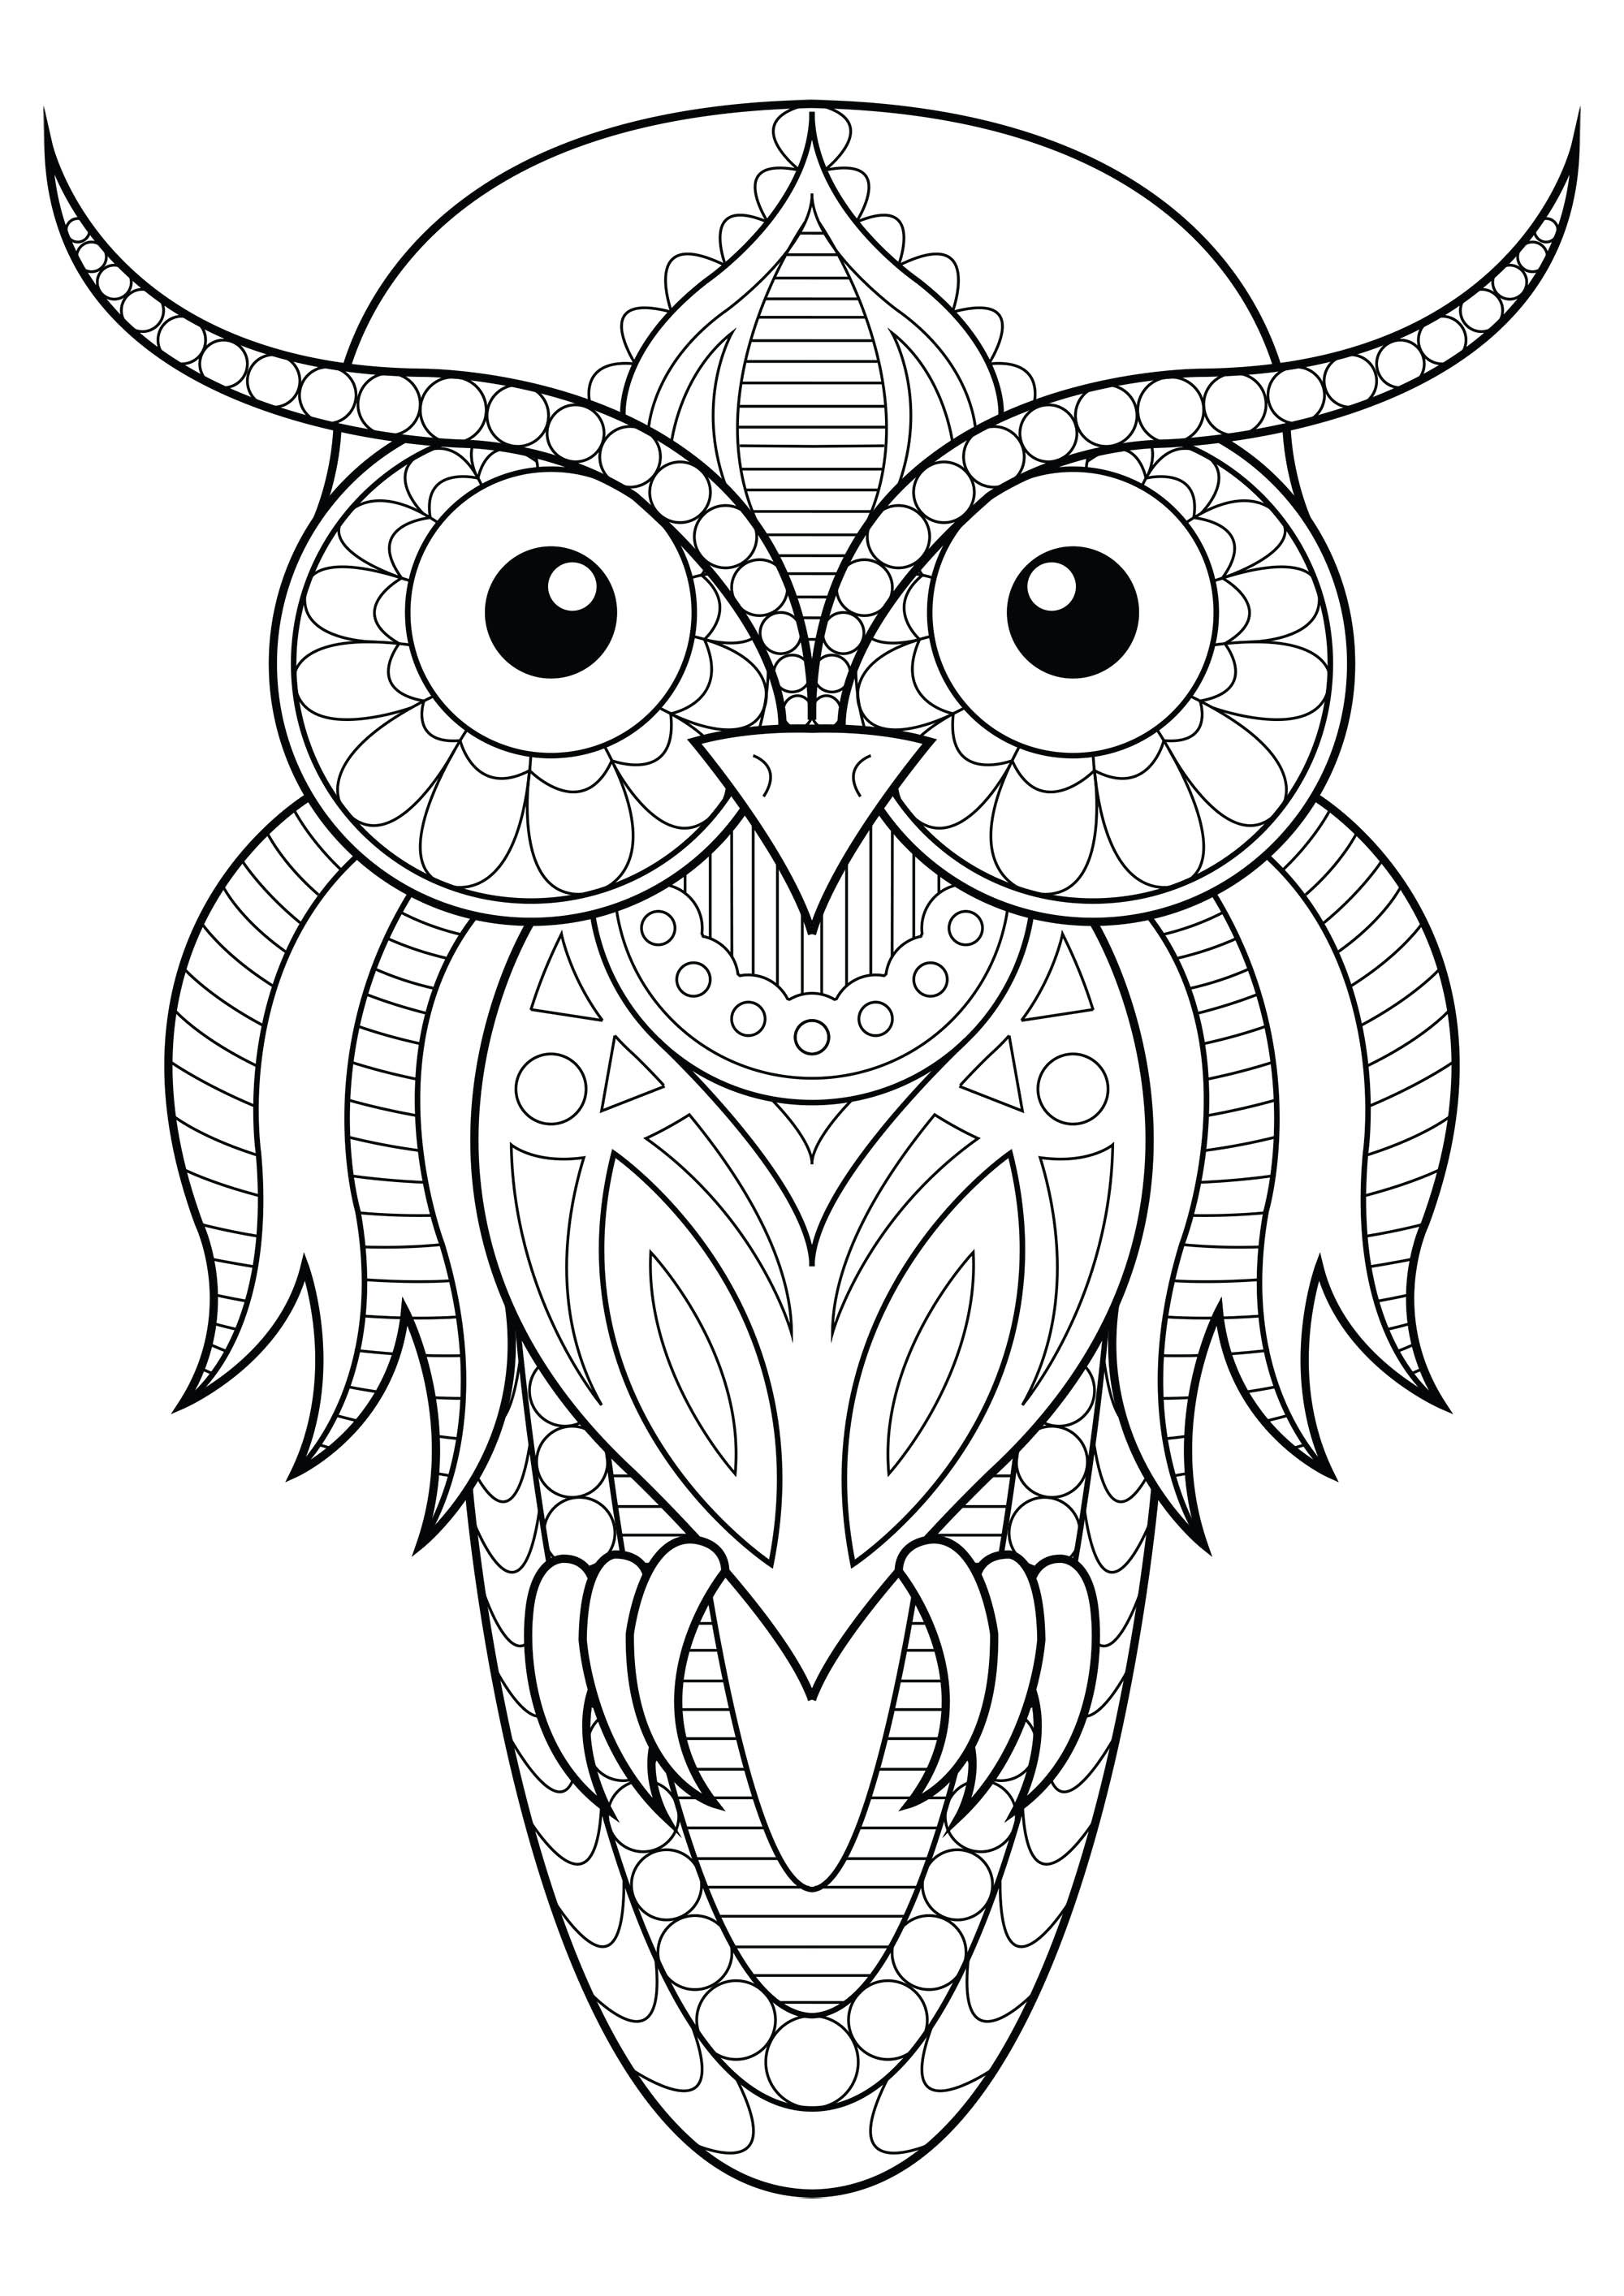 easy-mandala-page-owl-coloring-pages